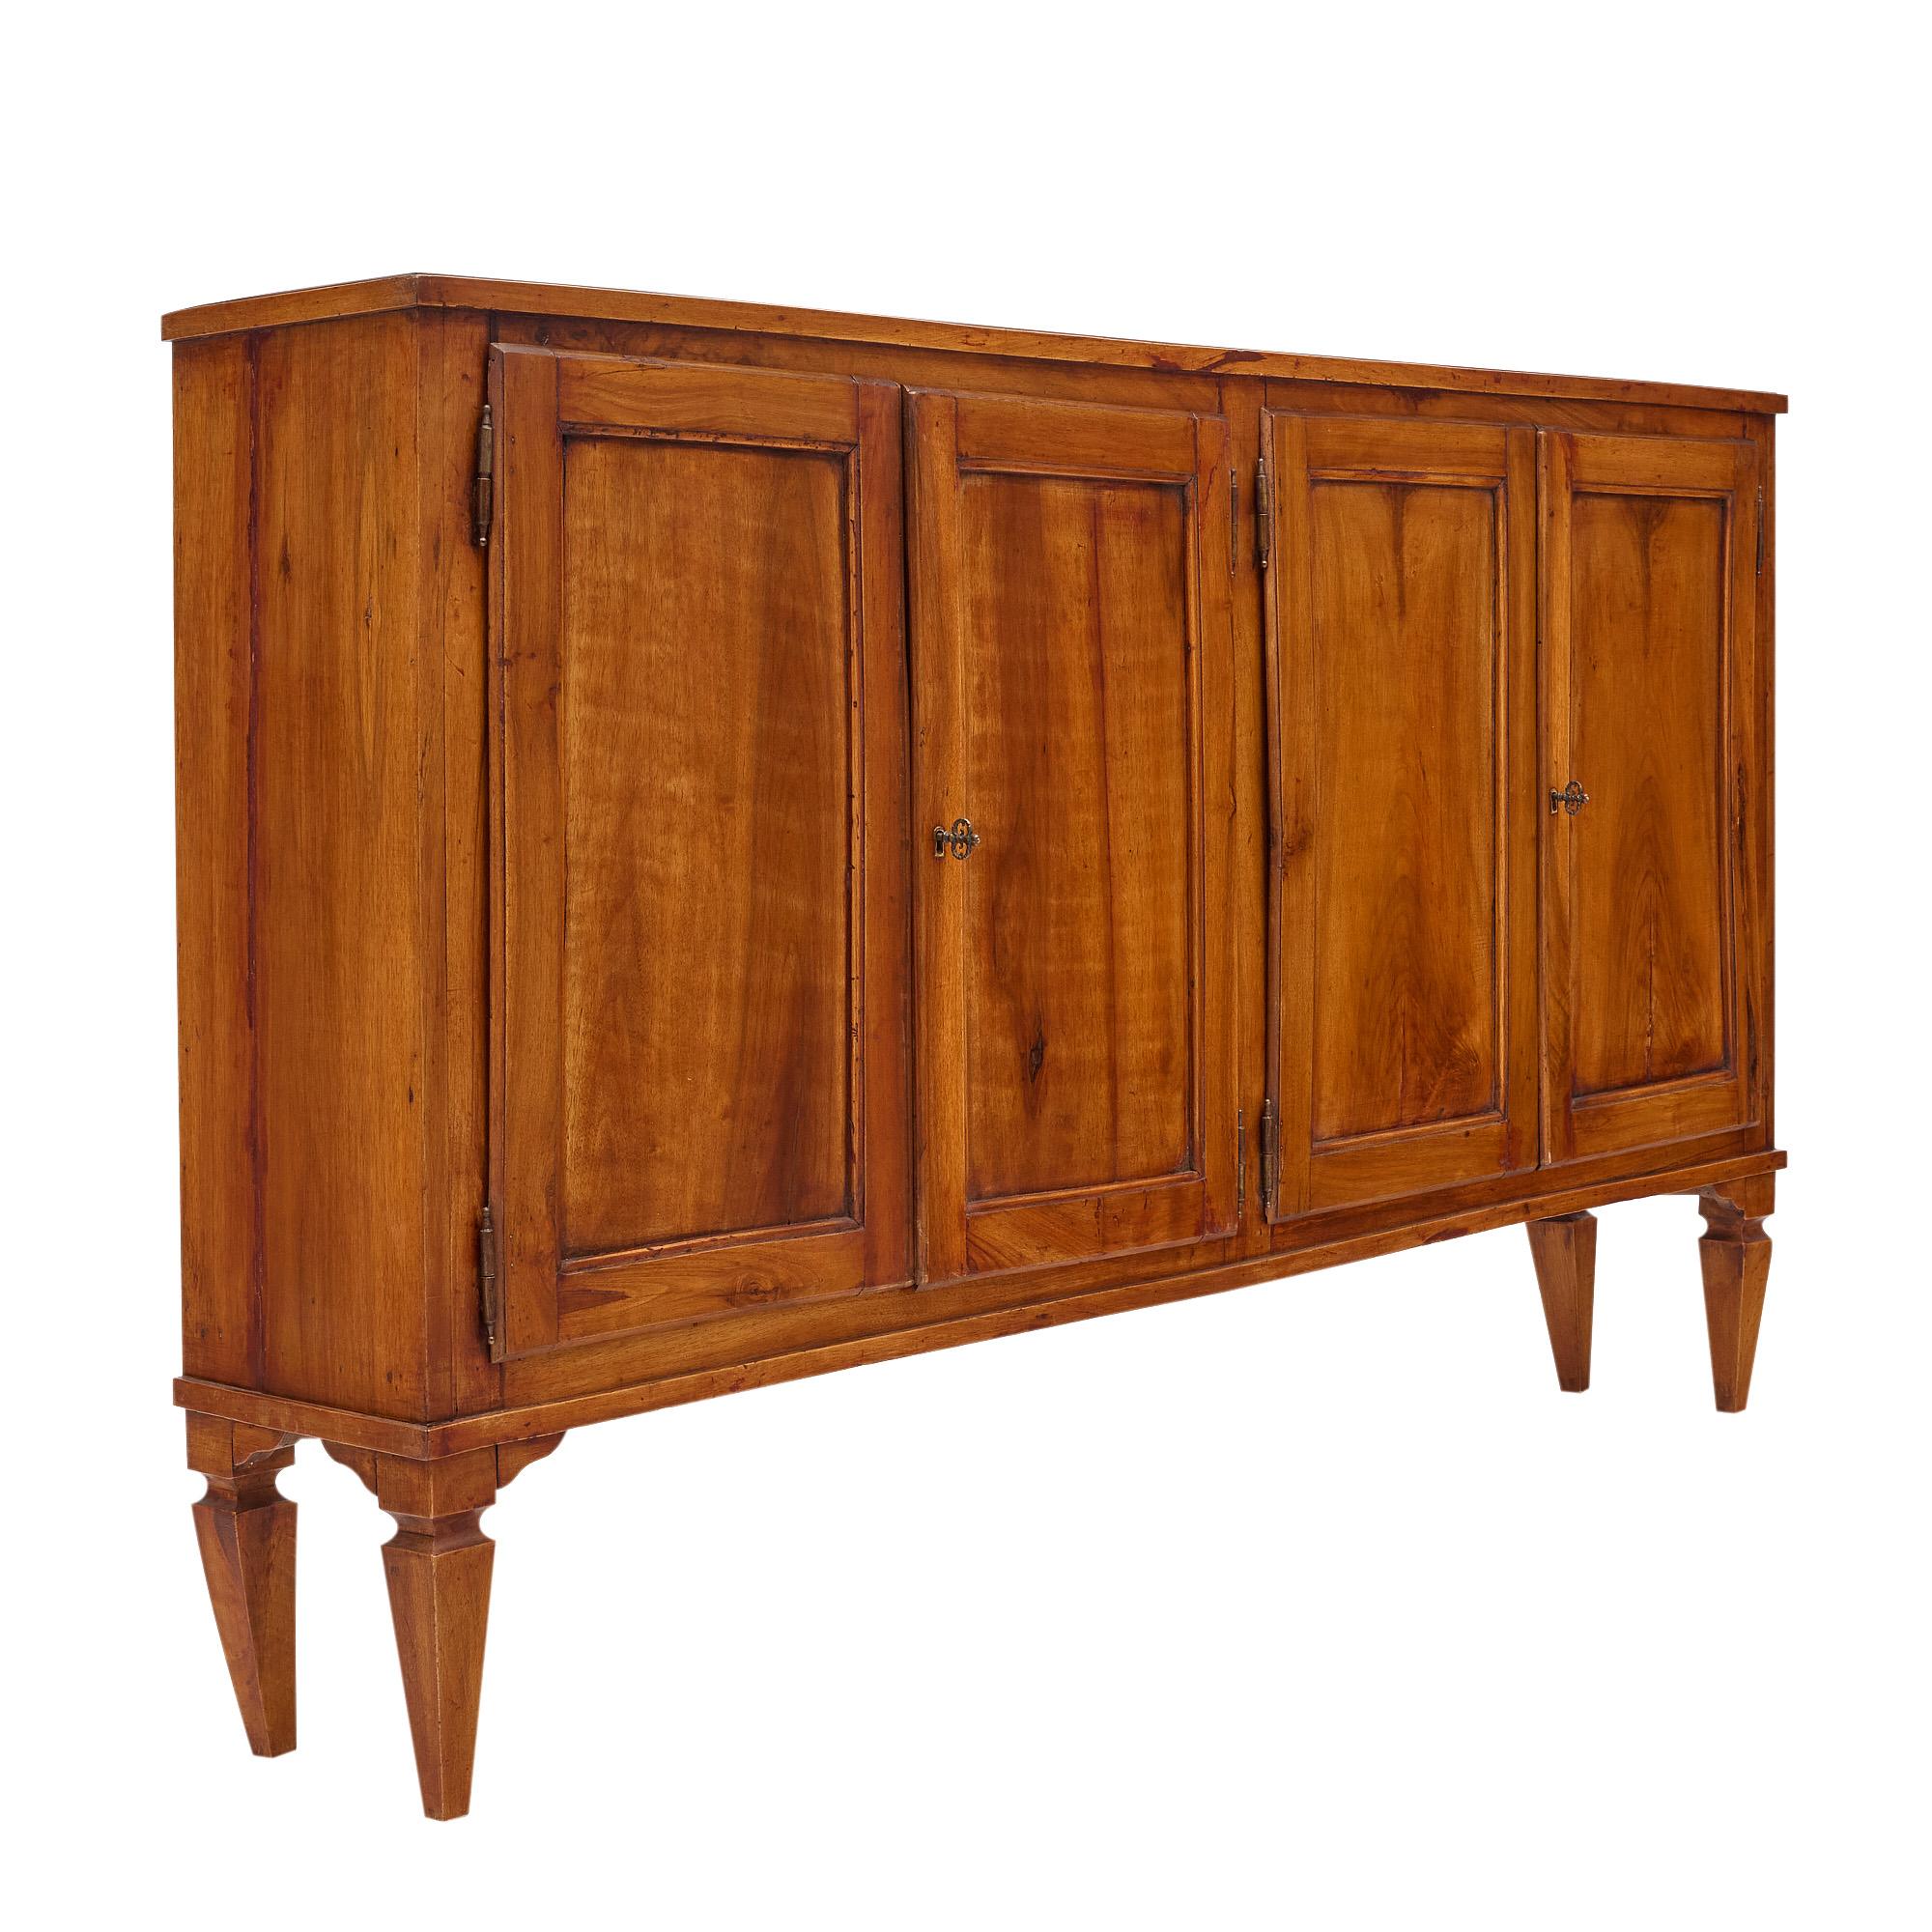 Cabinet or console from a restaurant in Avignon in the south of France, made of walnut and featuring two pairs of doors that open outwards to interior shelving. The beautiful honey tone of the walnut makes this shallow piece inviting and perfect for